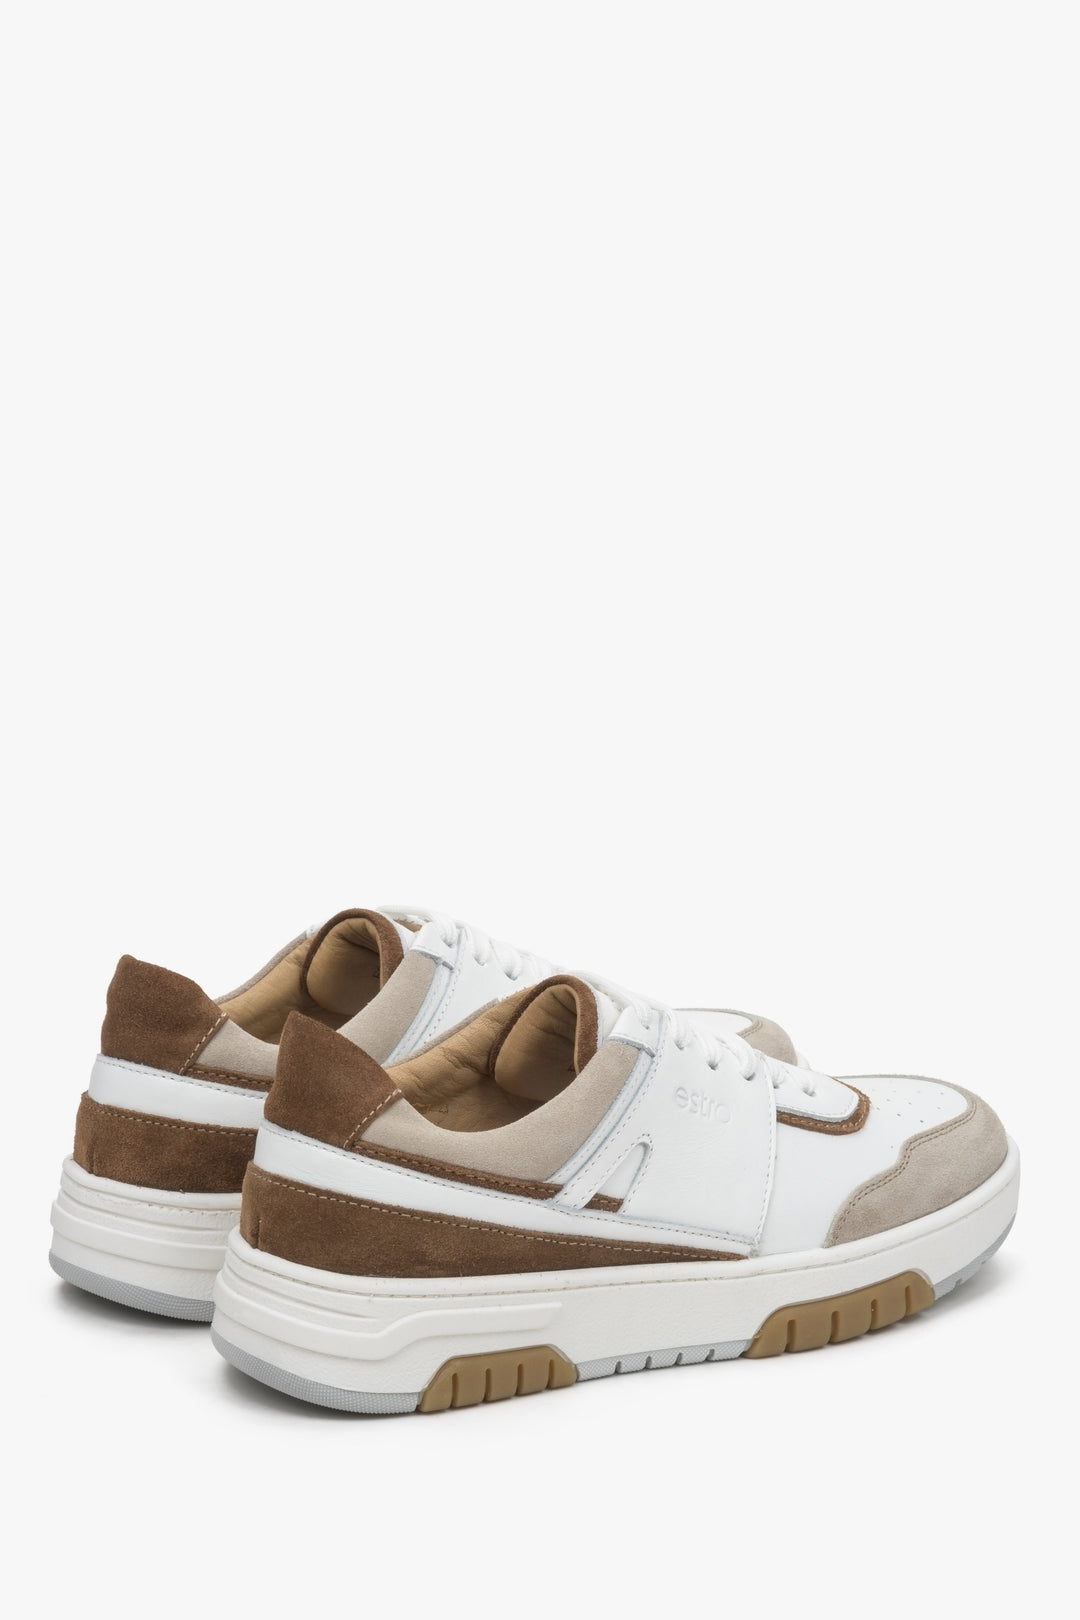 Leather and suede women's sneakers by Estro in beige-brown - close-up on the side seam of the shoe.